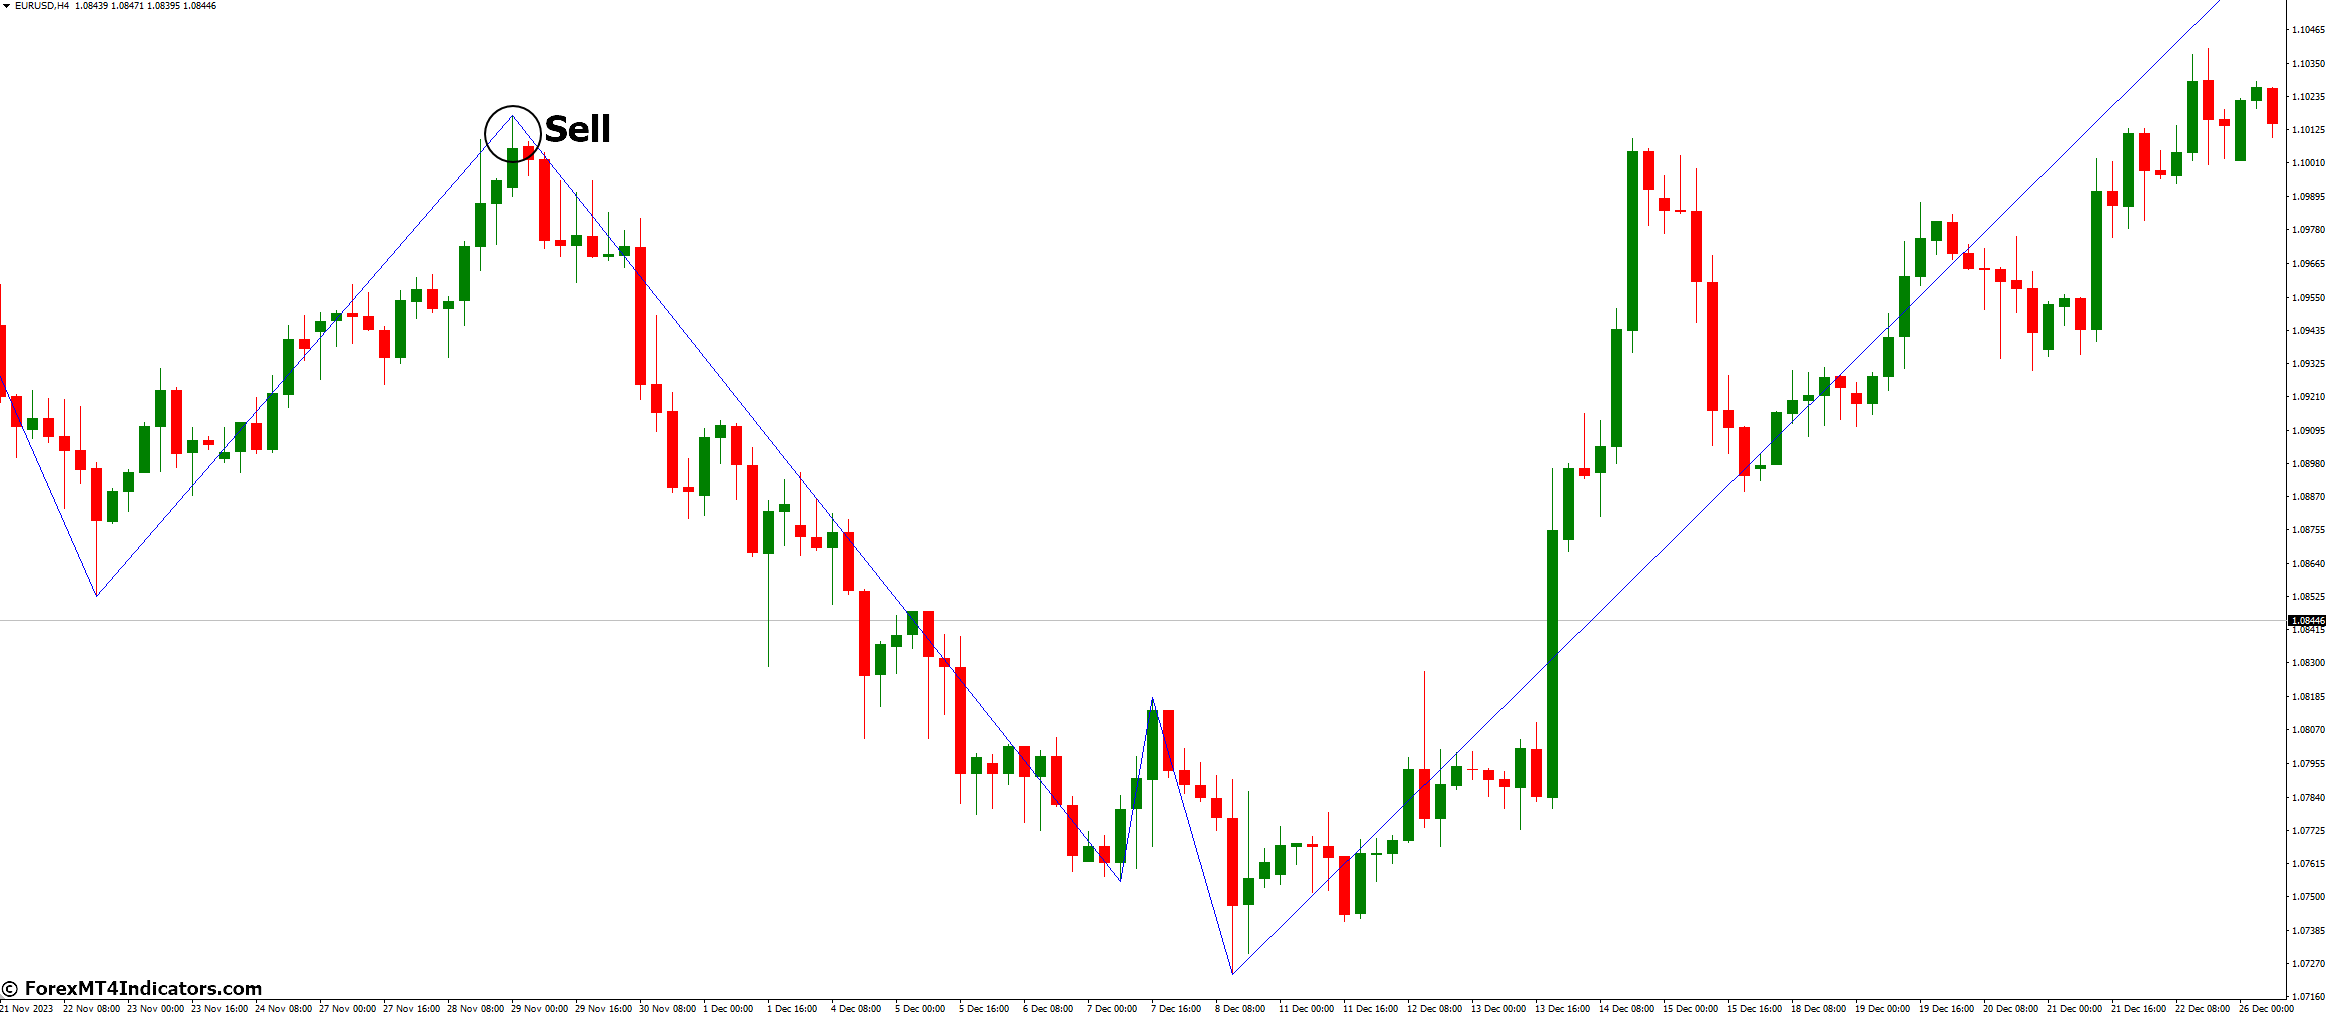 How to Trade with Zigzag 2 R Indicator - Sell Entry